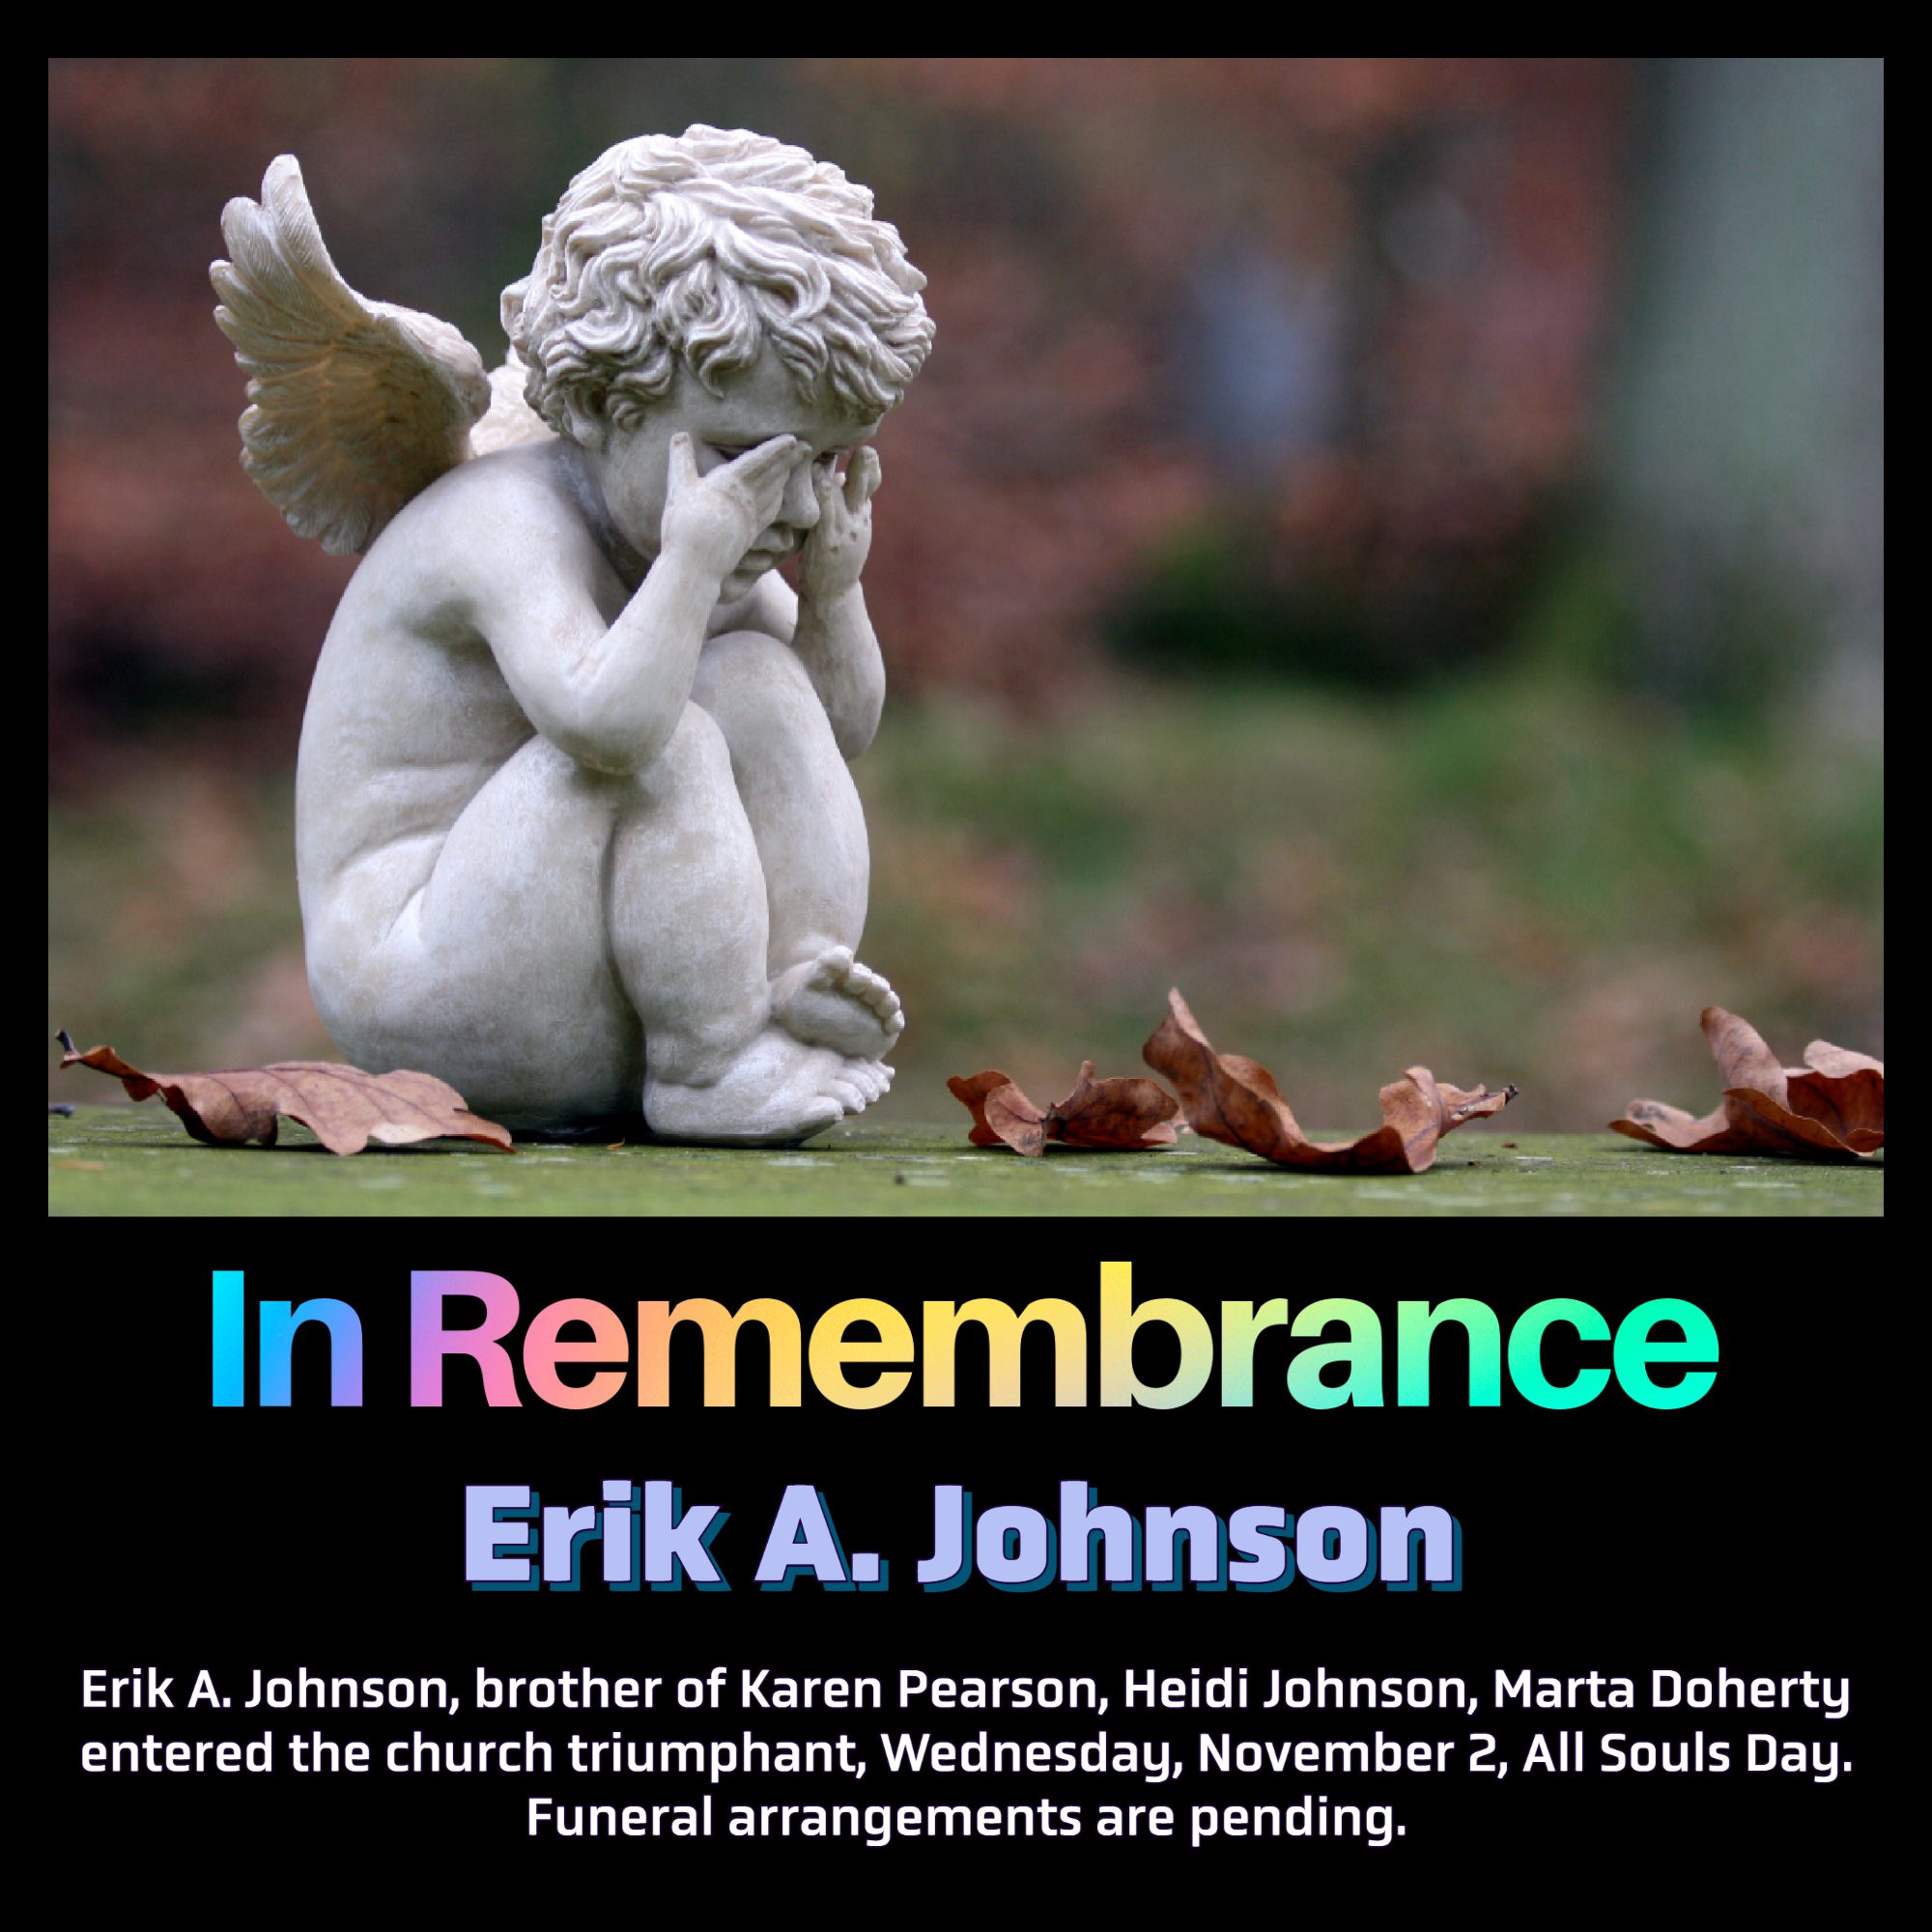 In Remembrance of Erik A. Johnson